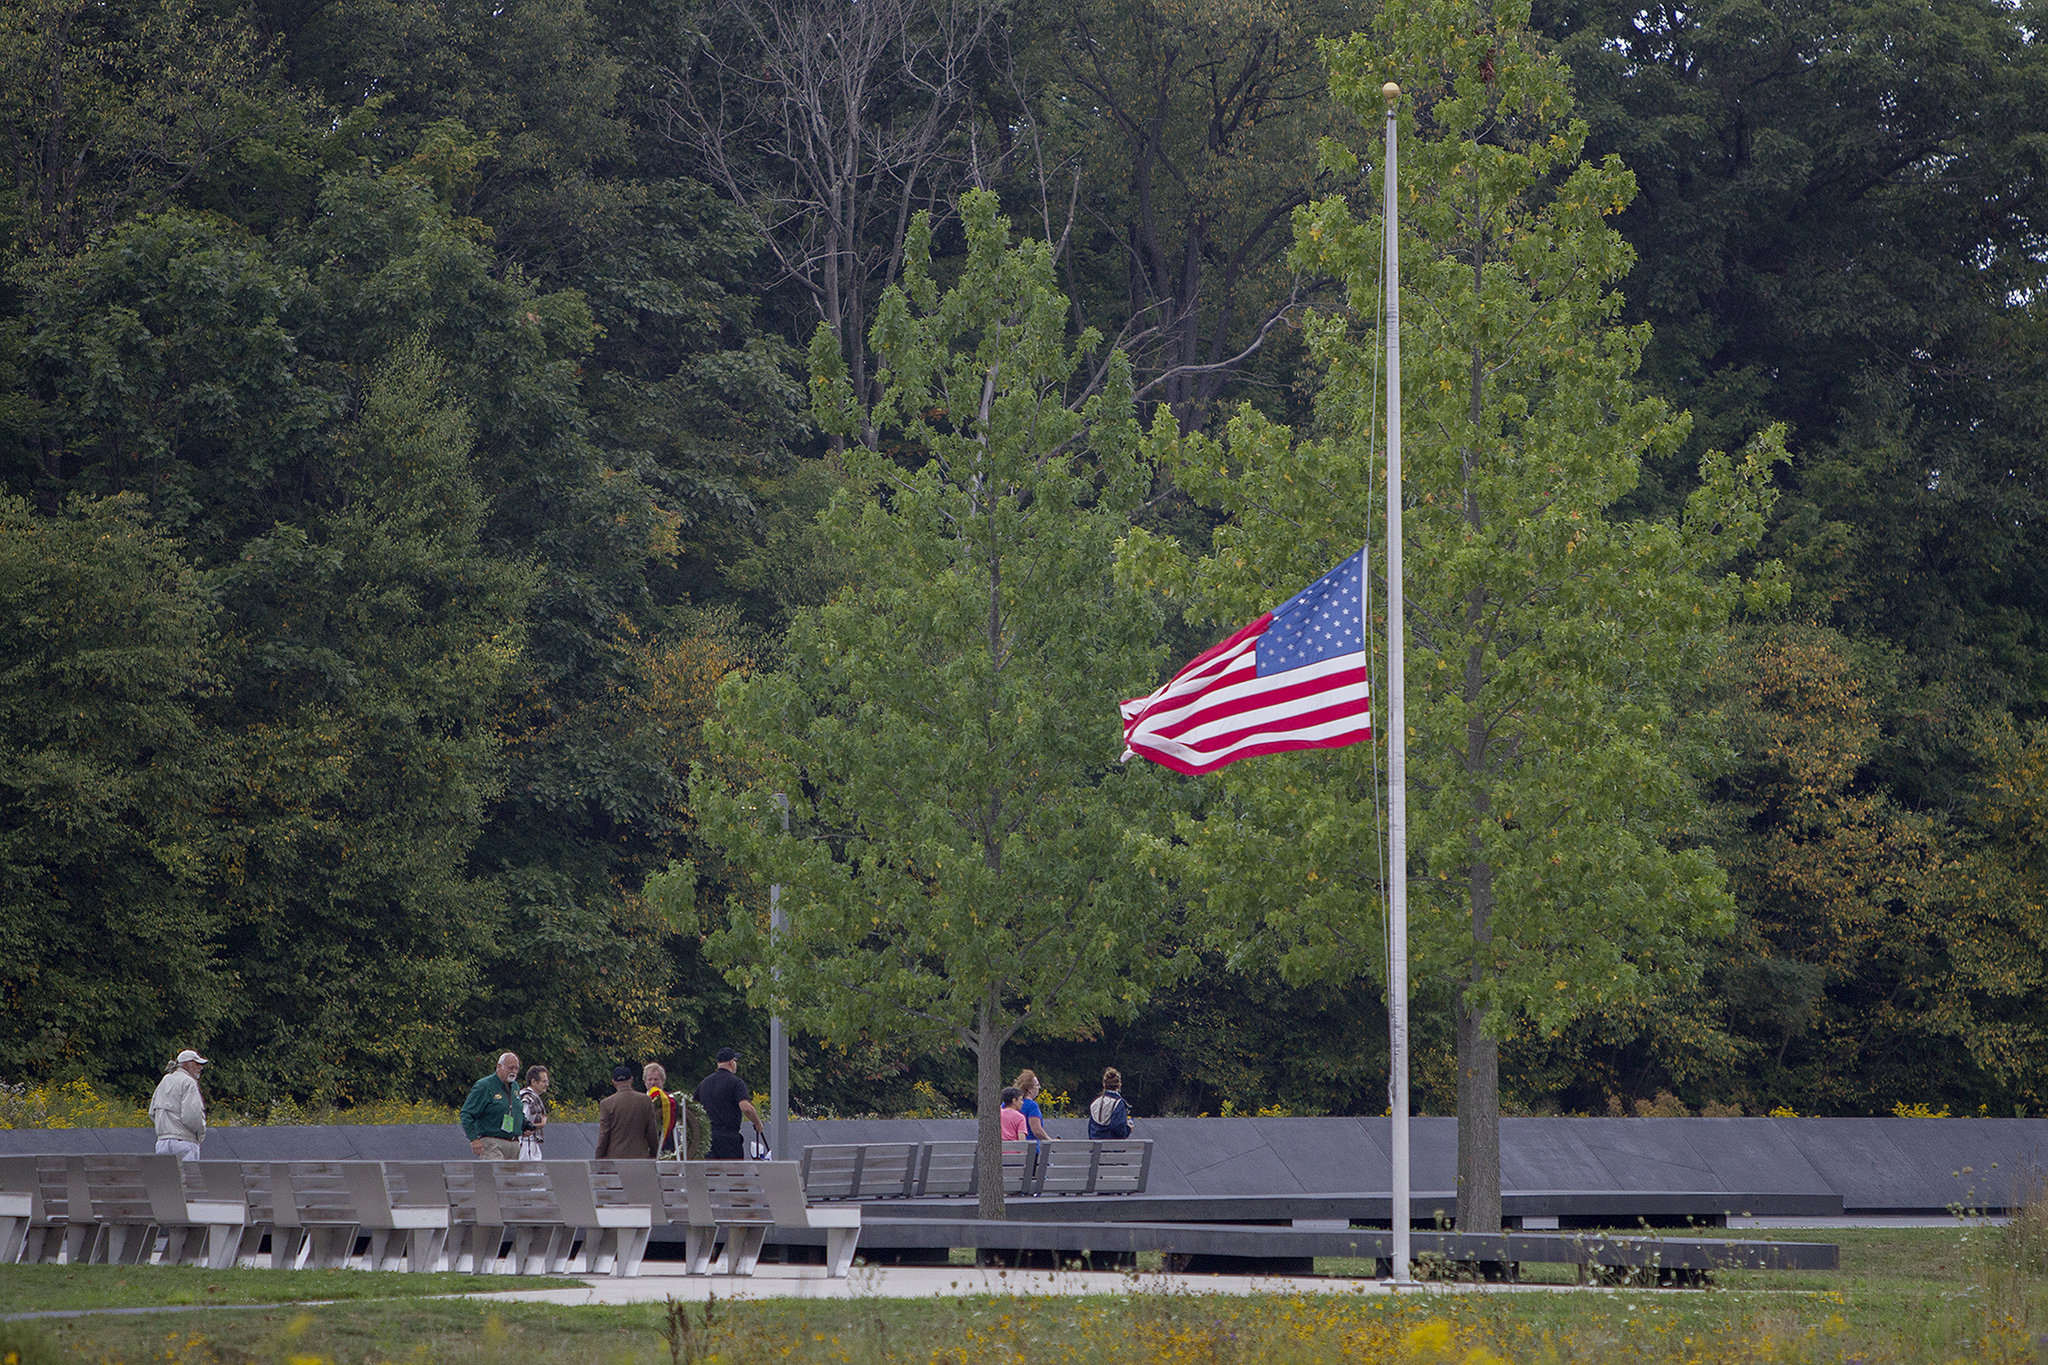 flight-93-national-memorial-remembrance-service-took-place-today-in-shanksville-3152161b596826e1.jpg